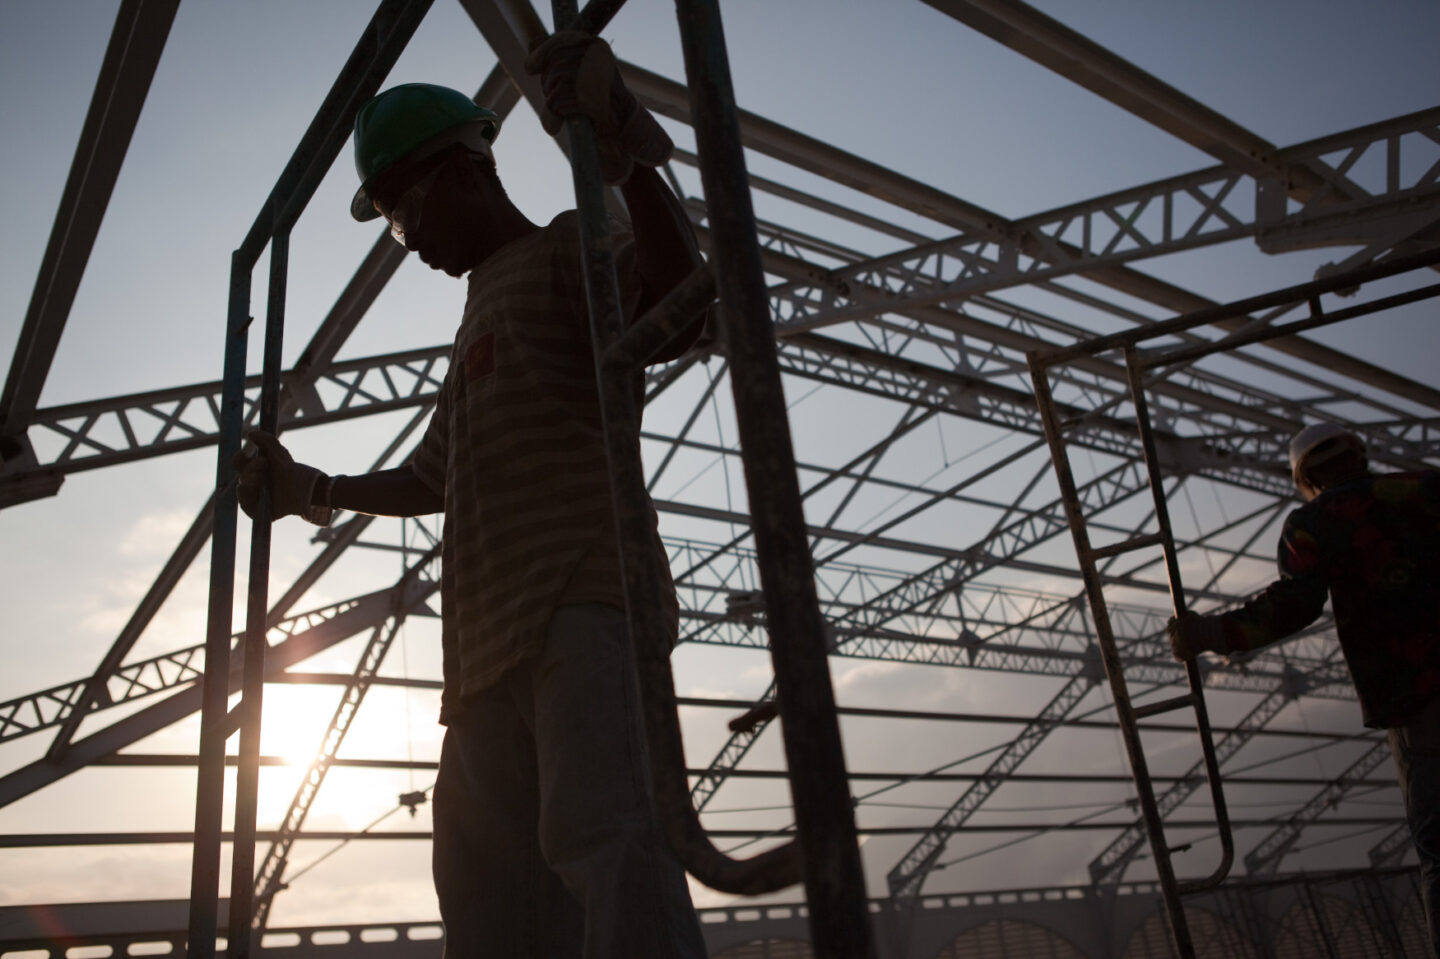 An individual wearing a hard hat stands amid a construction project